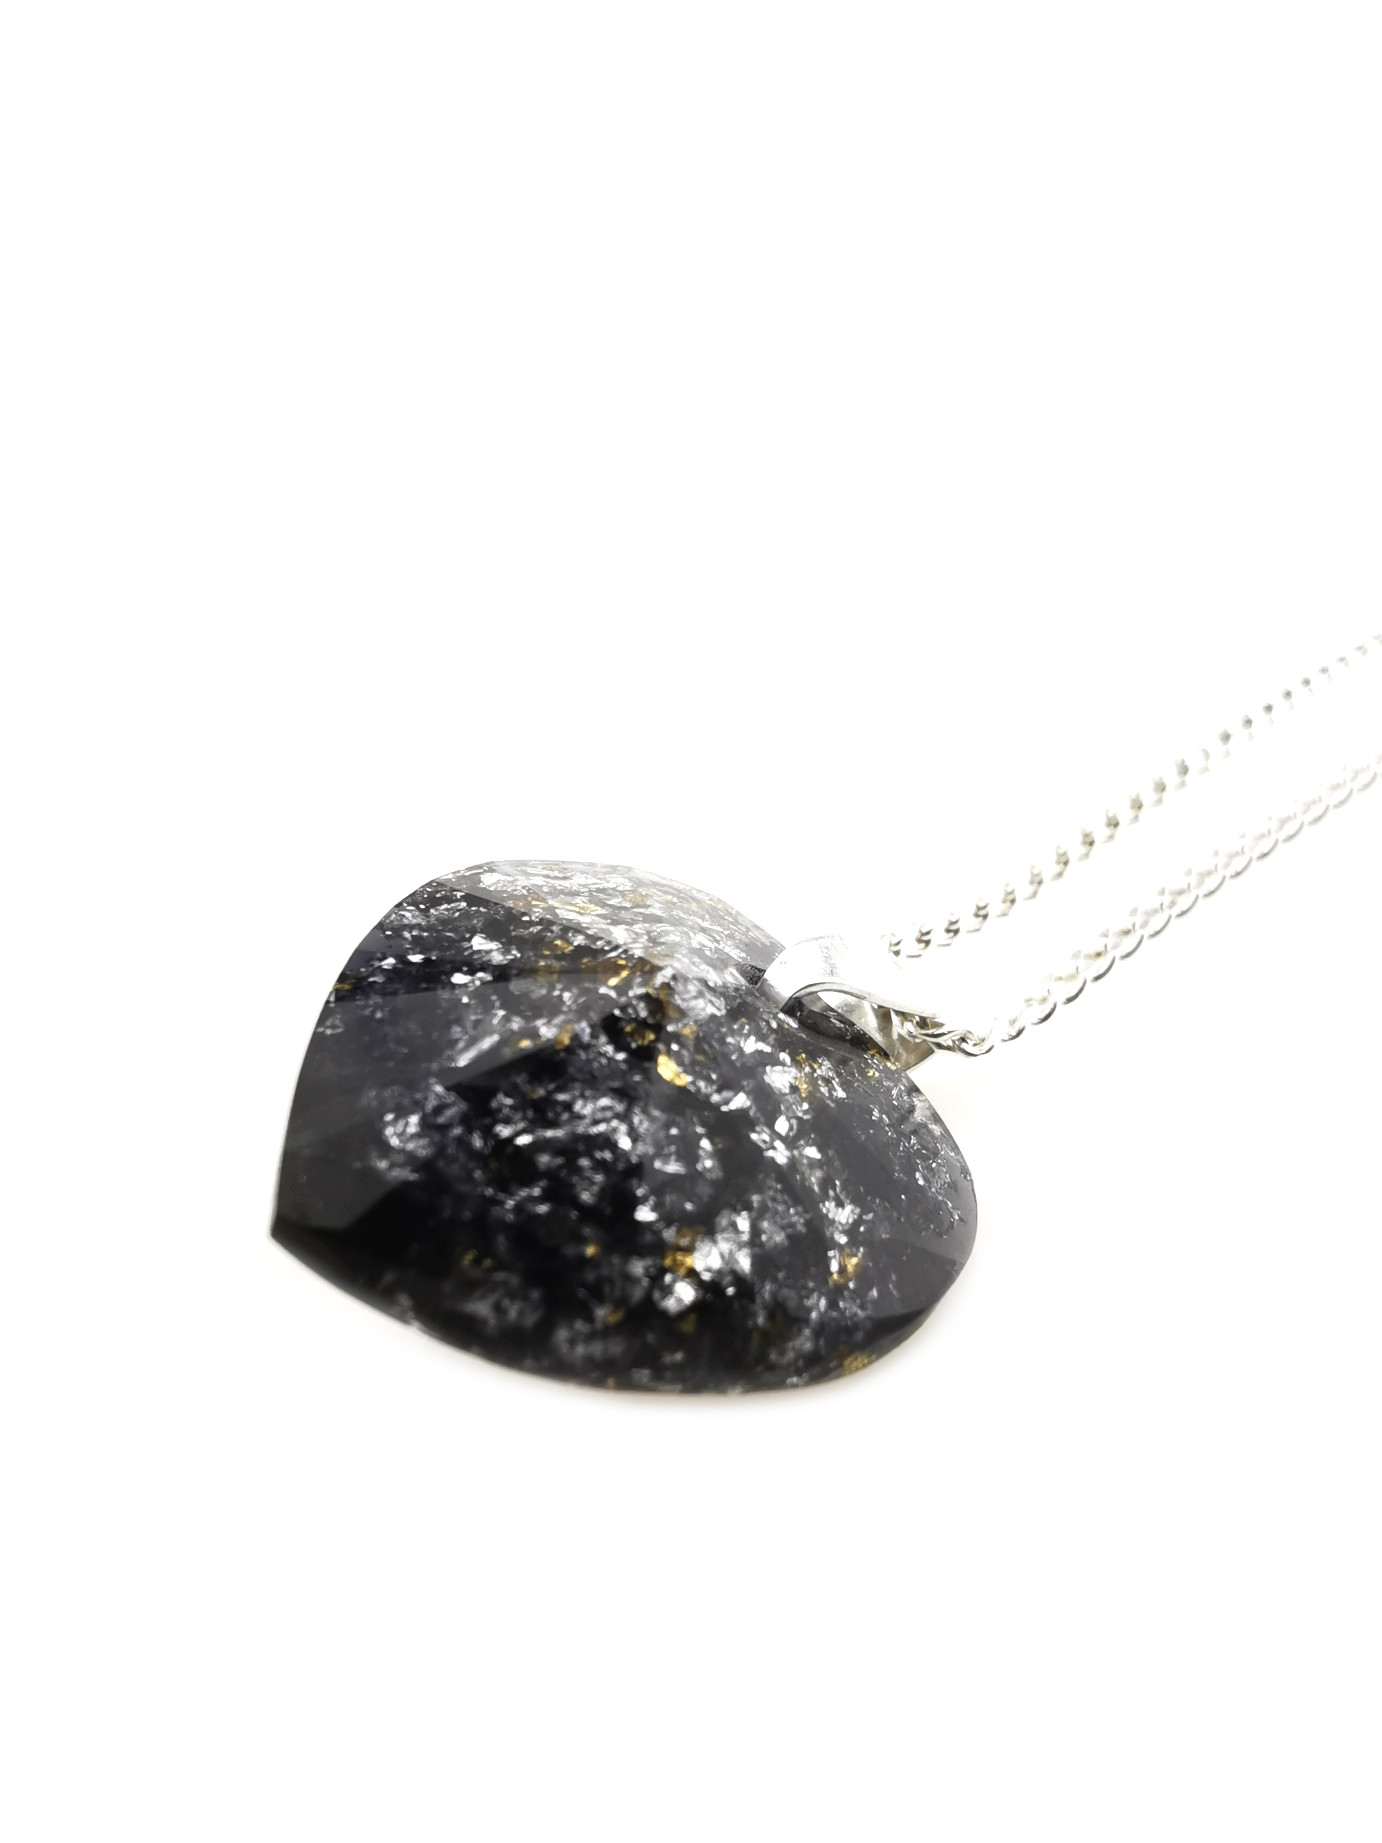 Black Heart Orgone Pendant with Gold and Silver by OrgoneVibes